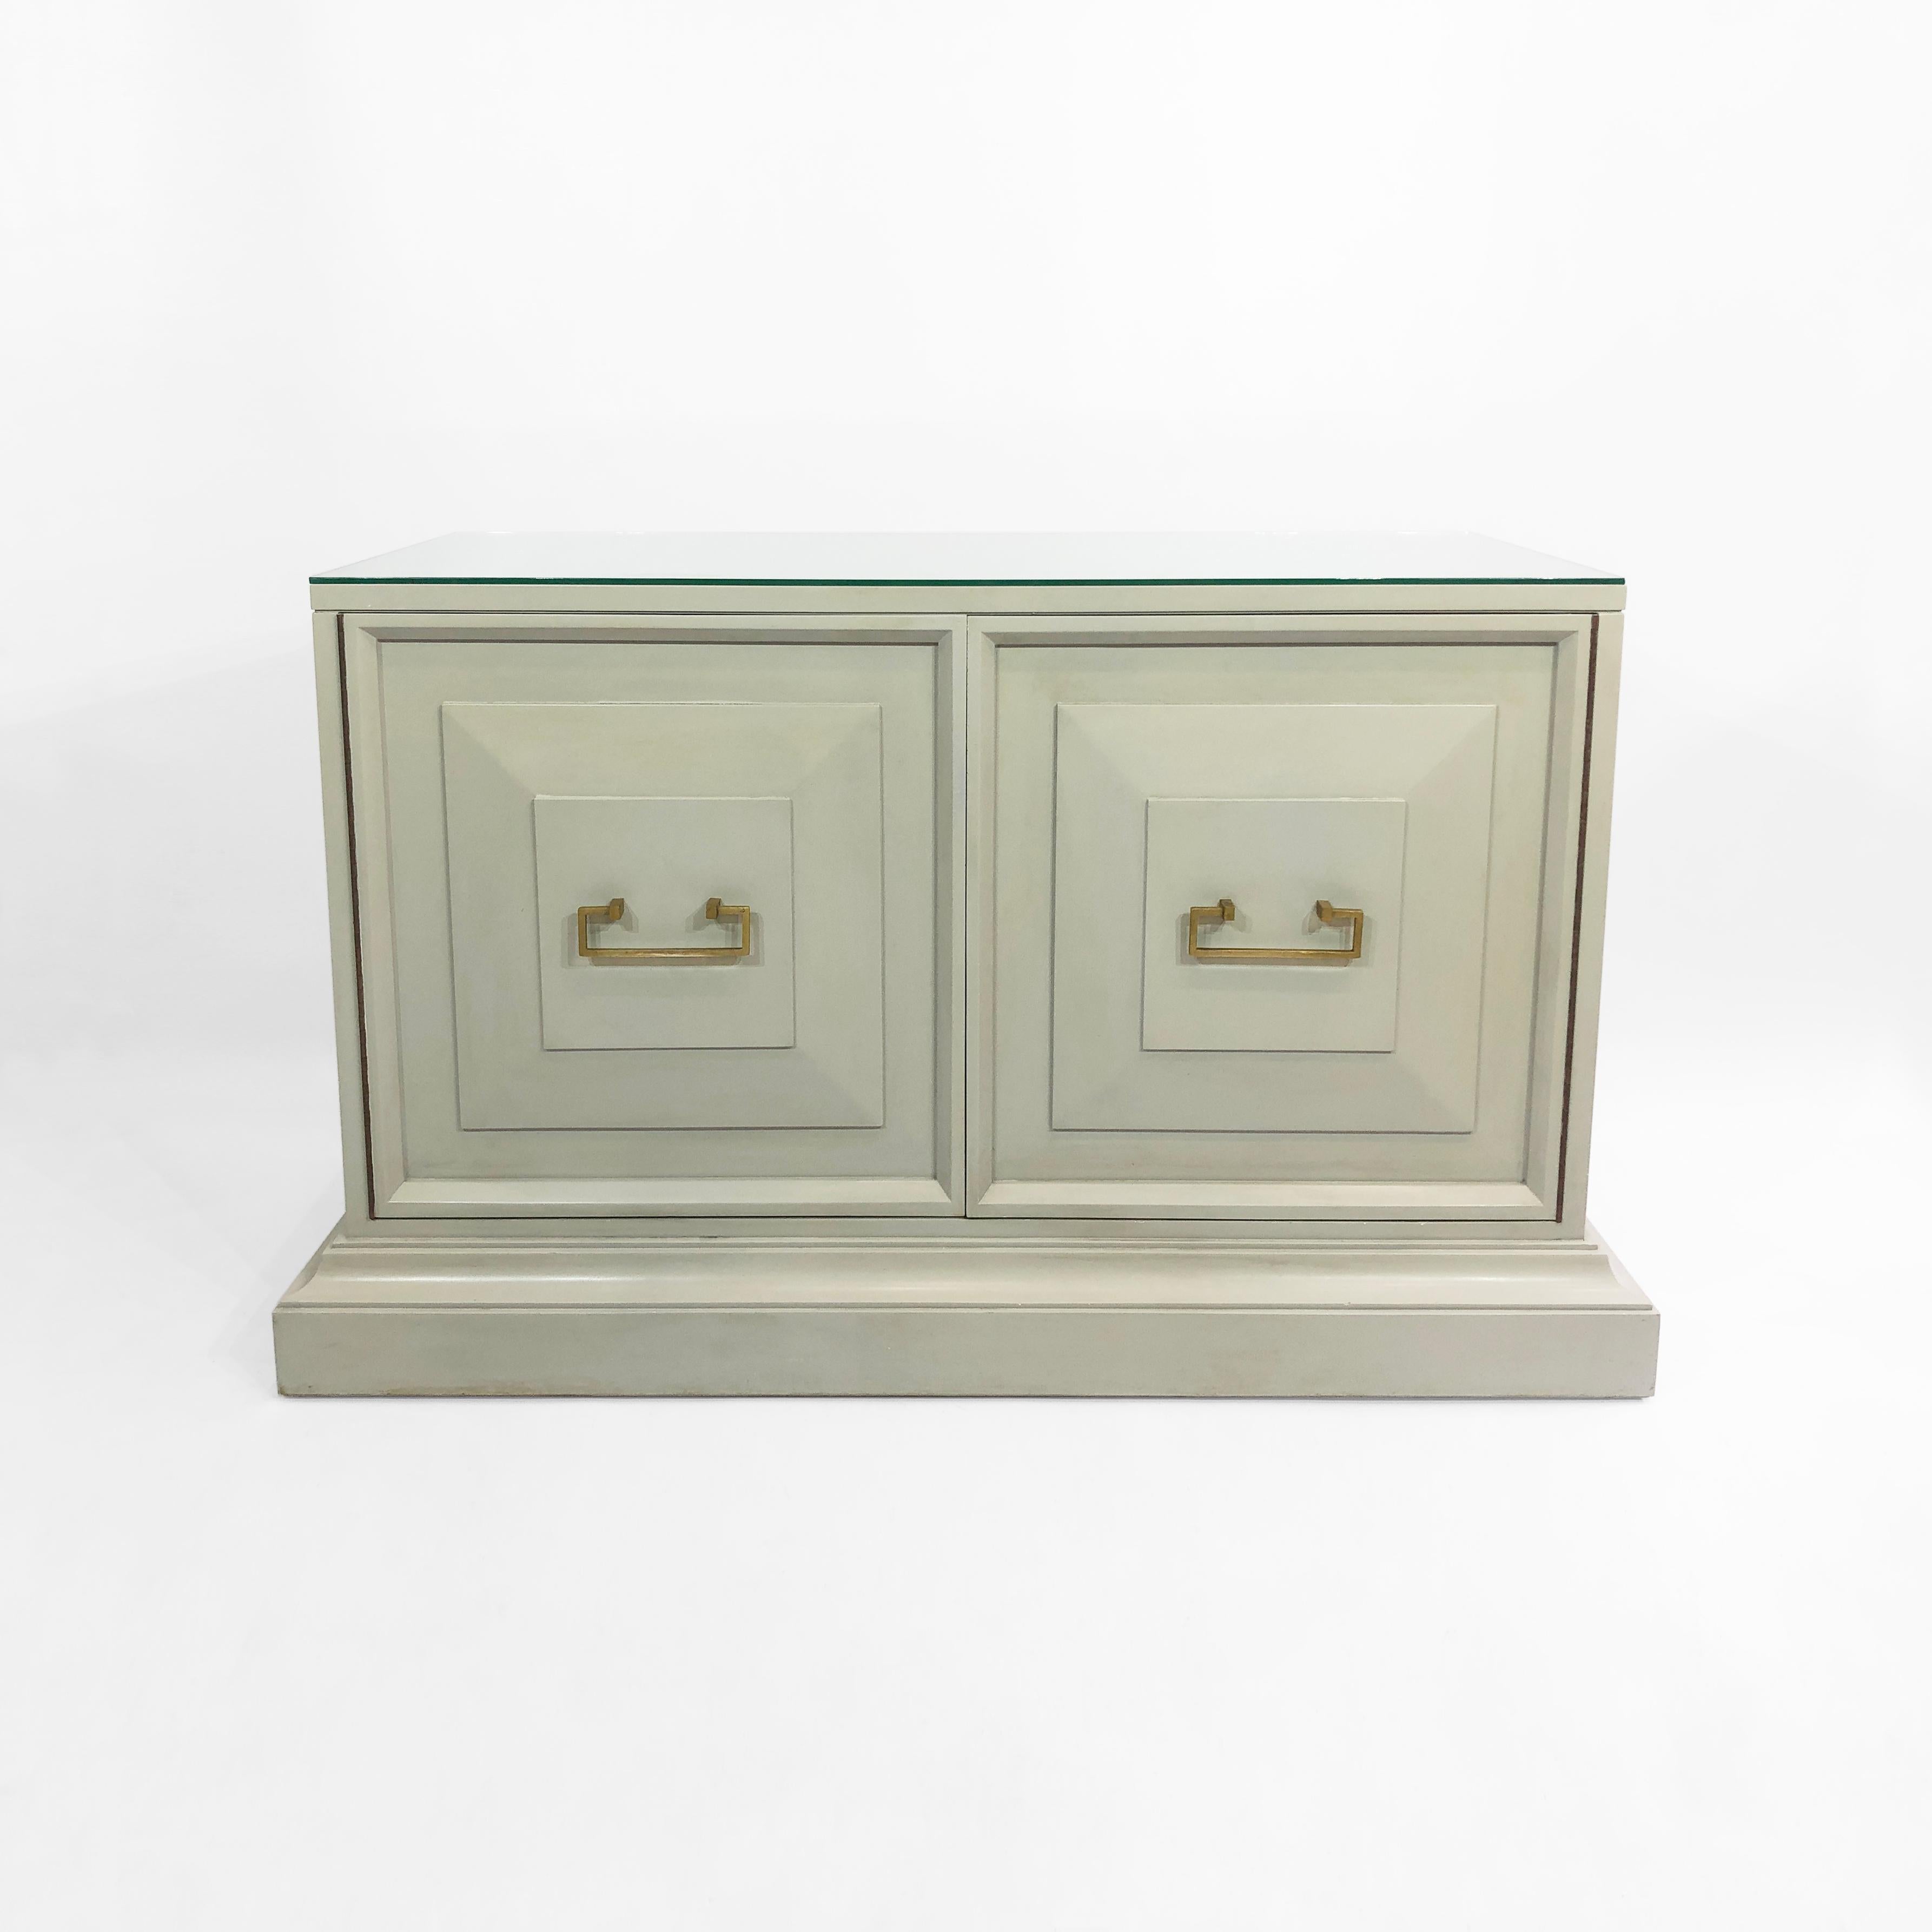 An elegant yet robust cabinet in a light duck egg blue sits atop a plinth in this stunning neoclassical inspired piece from ‘70s America. There are elements of chinoiserie in the design of the cabinet. The hinges are made of brass, whilst the